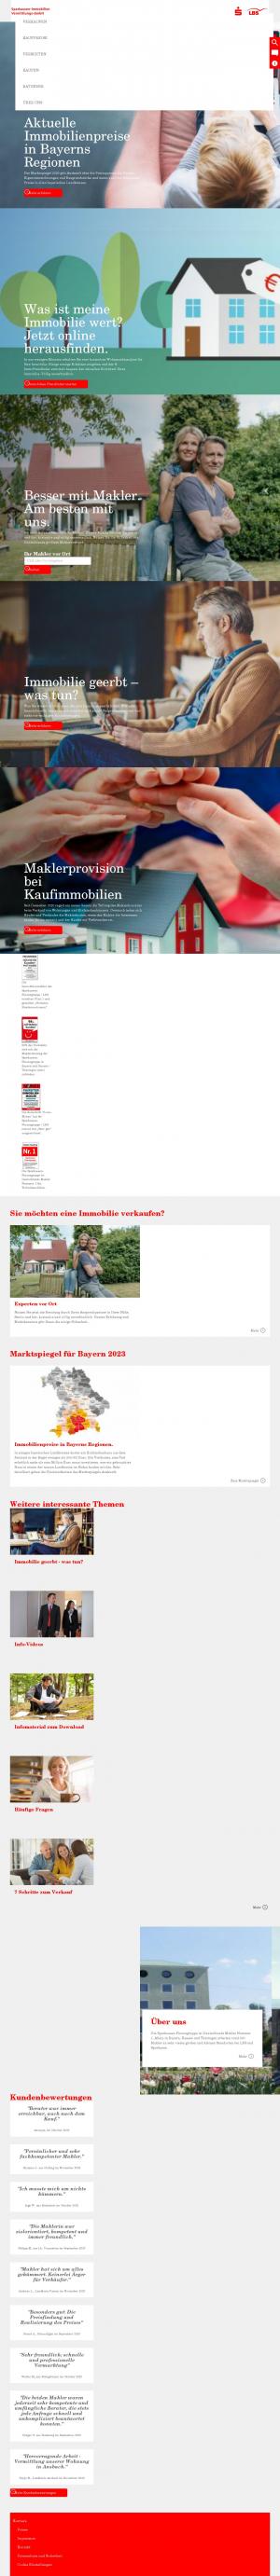 www.sparkasse.immo